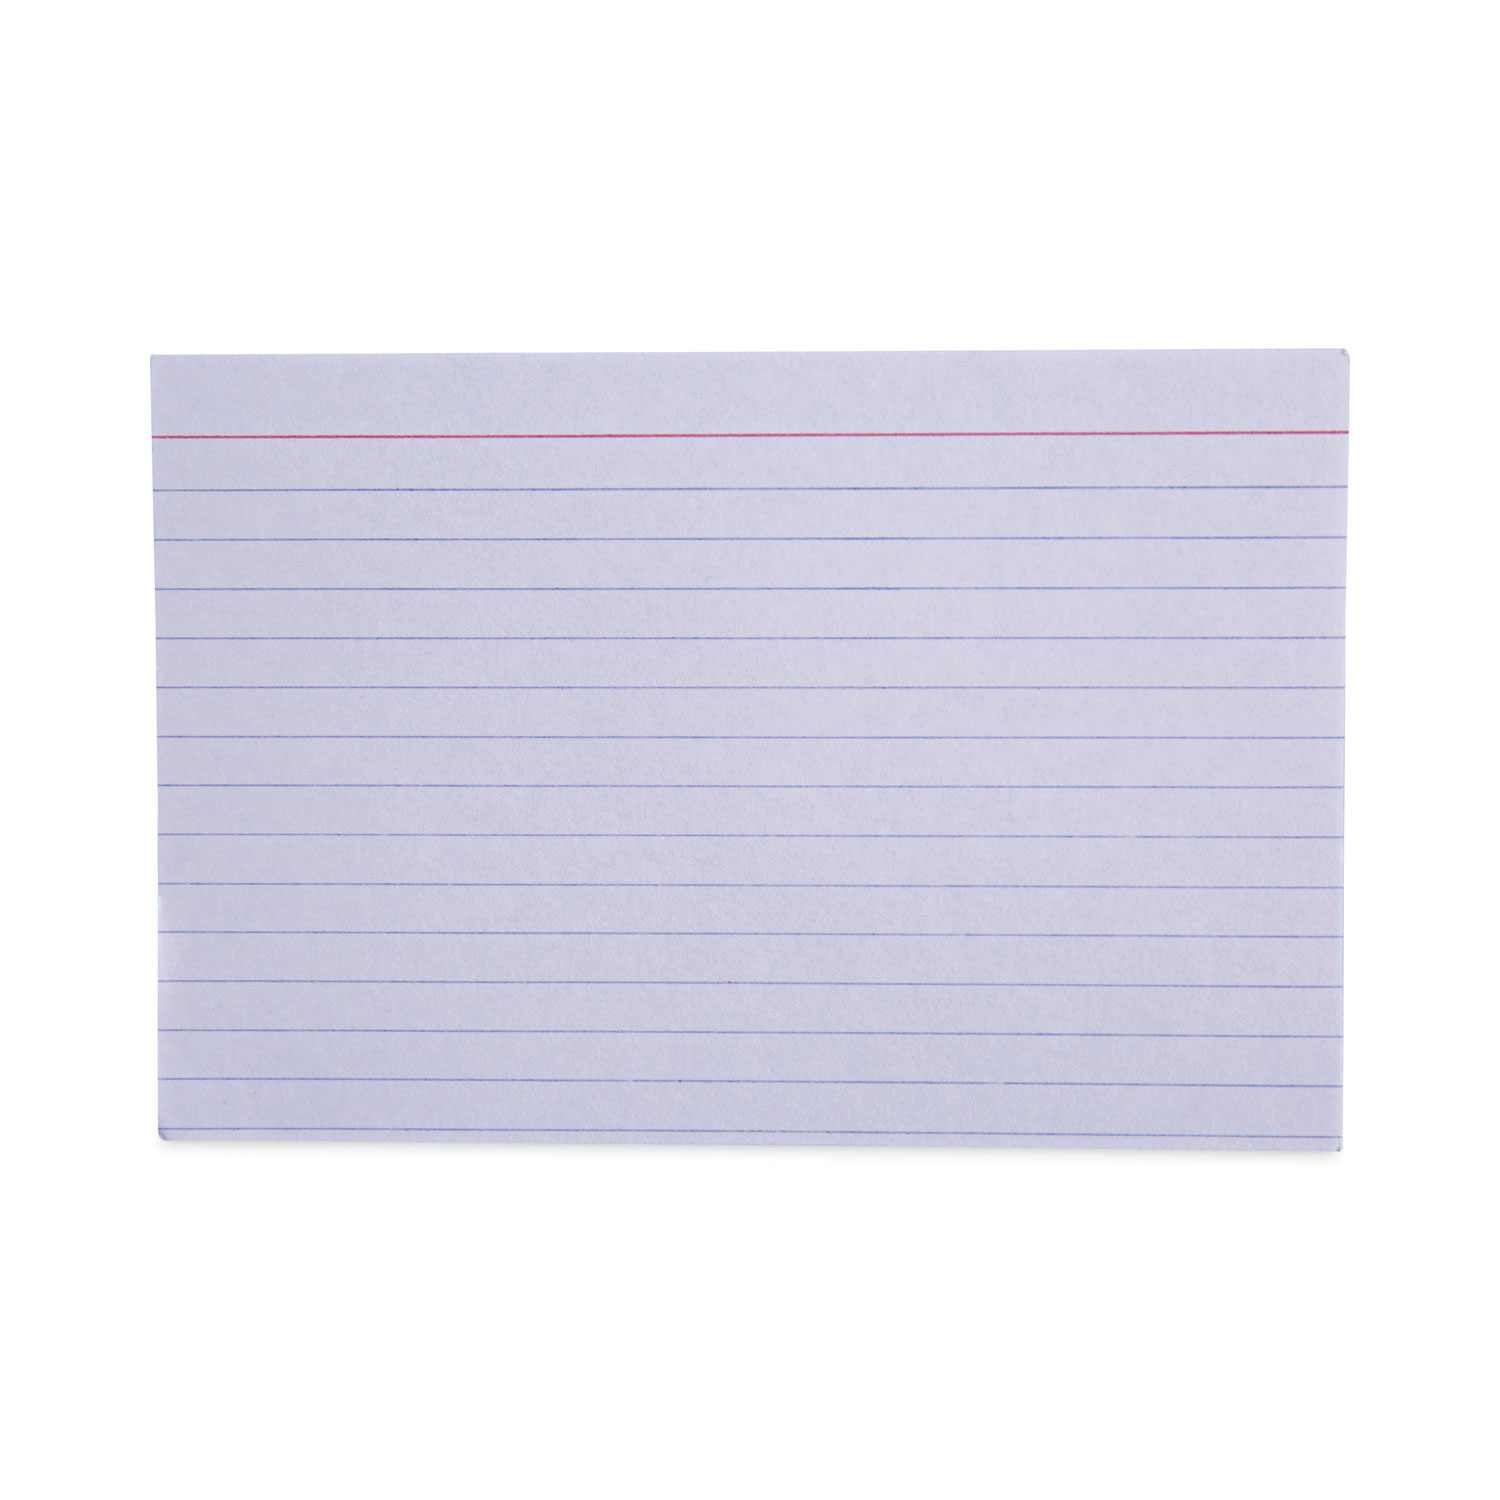 Business Source Index Cards, 4 x 6 Inches, Unruled, White, Pack of 100